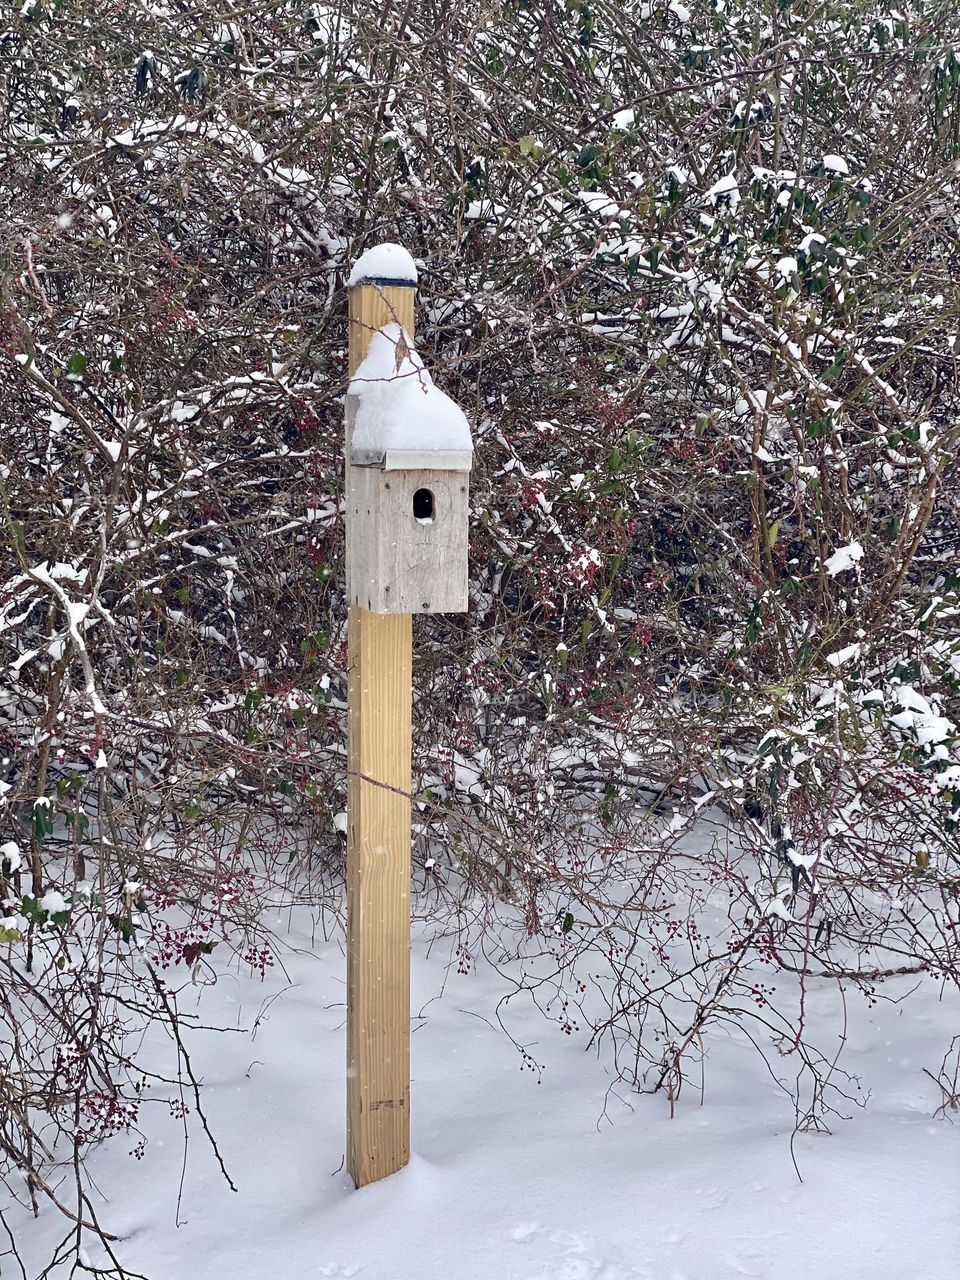 A birdhouse covered in snow during a snowstorm 